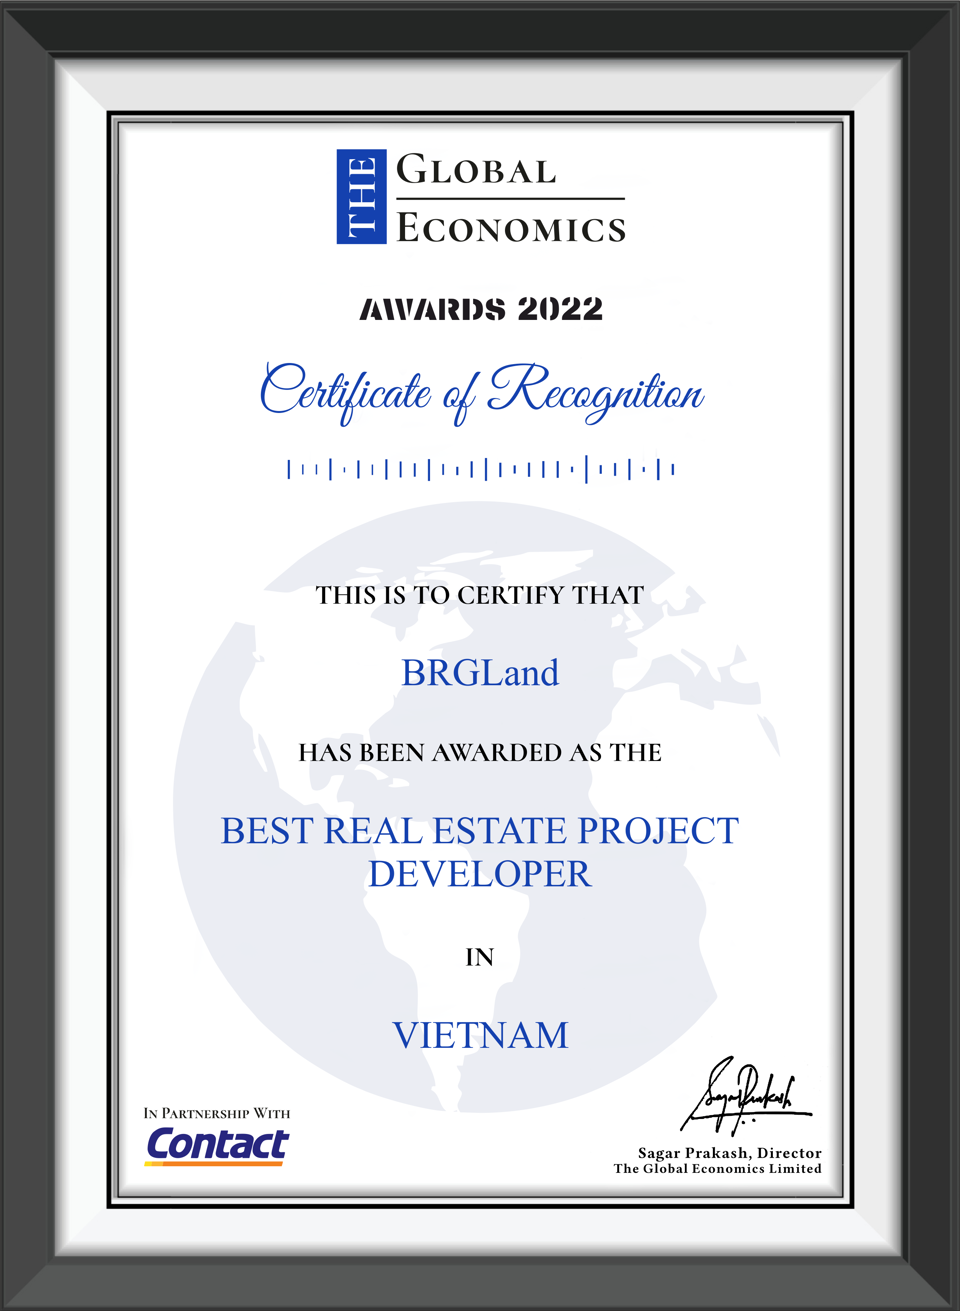 BRGLand was honored as the best real estate developer in Vietnam 2022